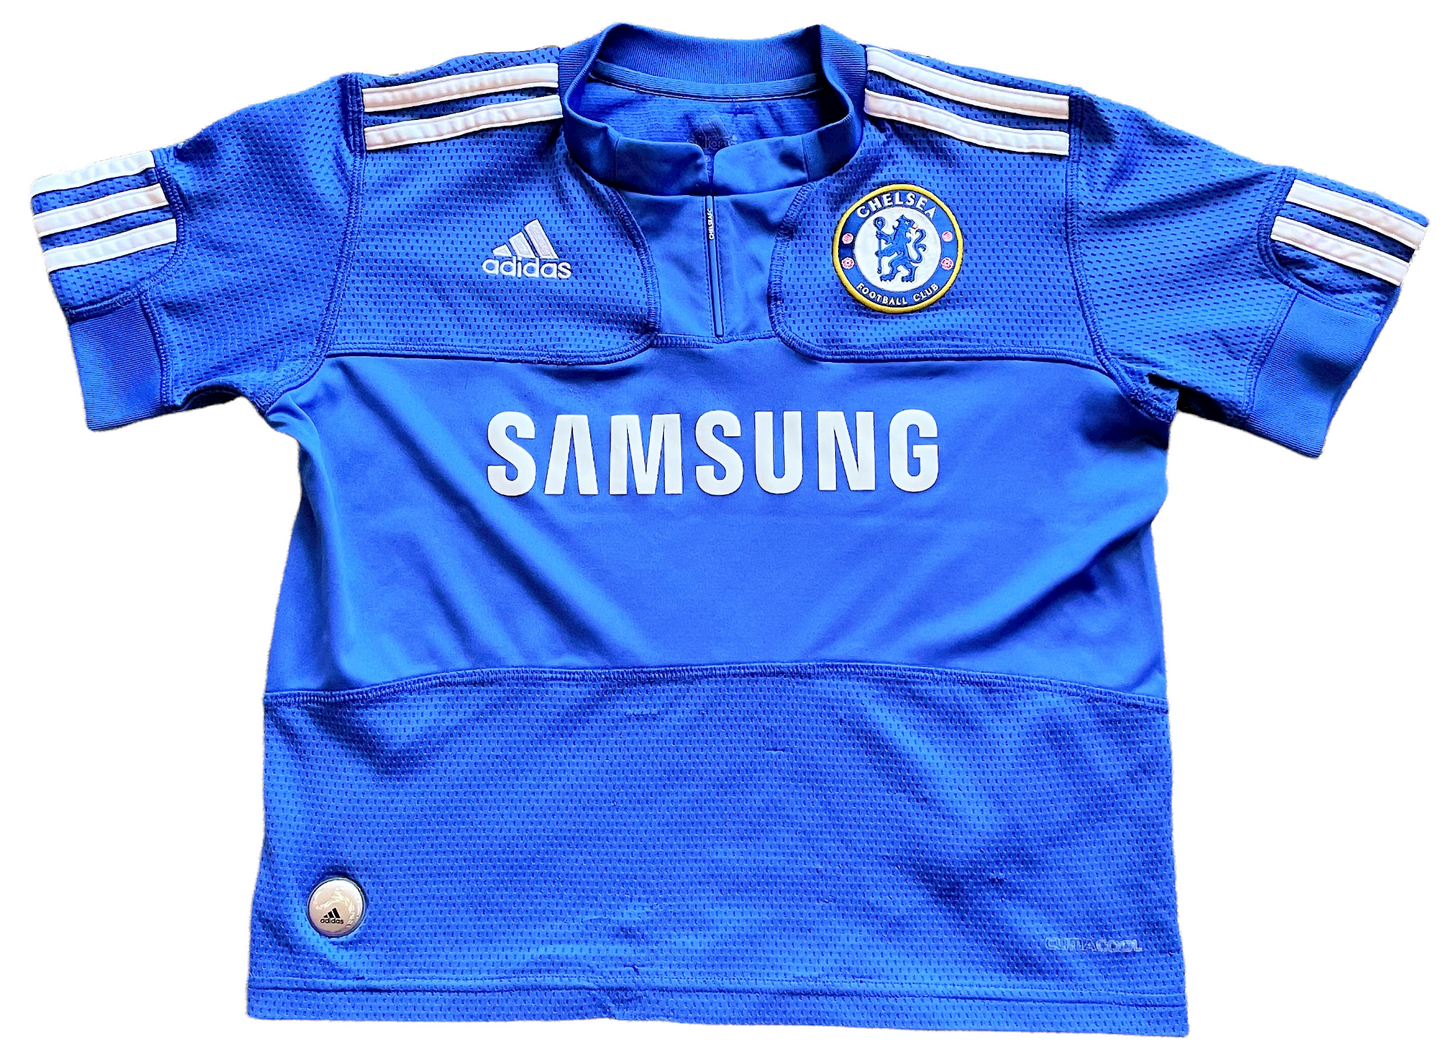 2009-10 Chelsea Home Shirt (very good) Childs 7-8